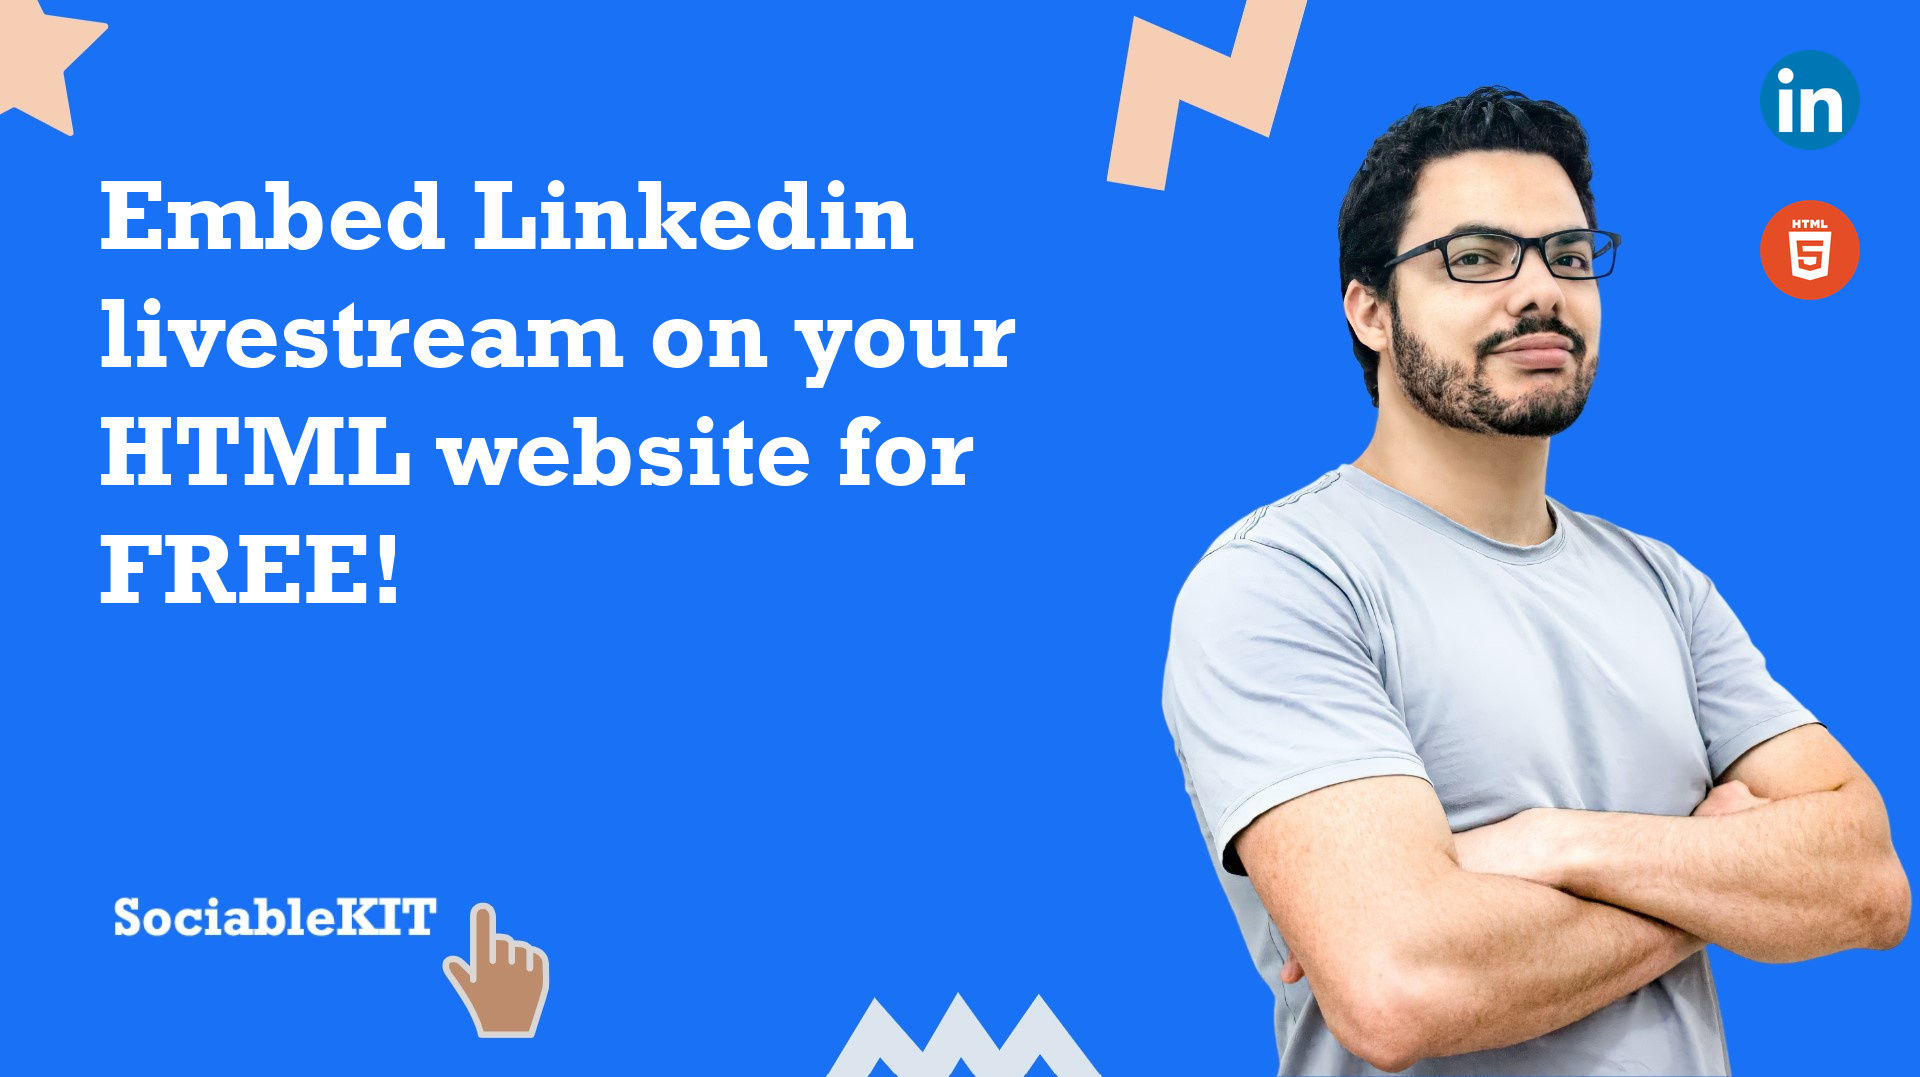 How to embed Linkedin livestream on your HTML website for FREE?